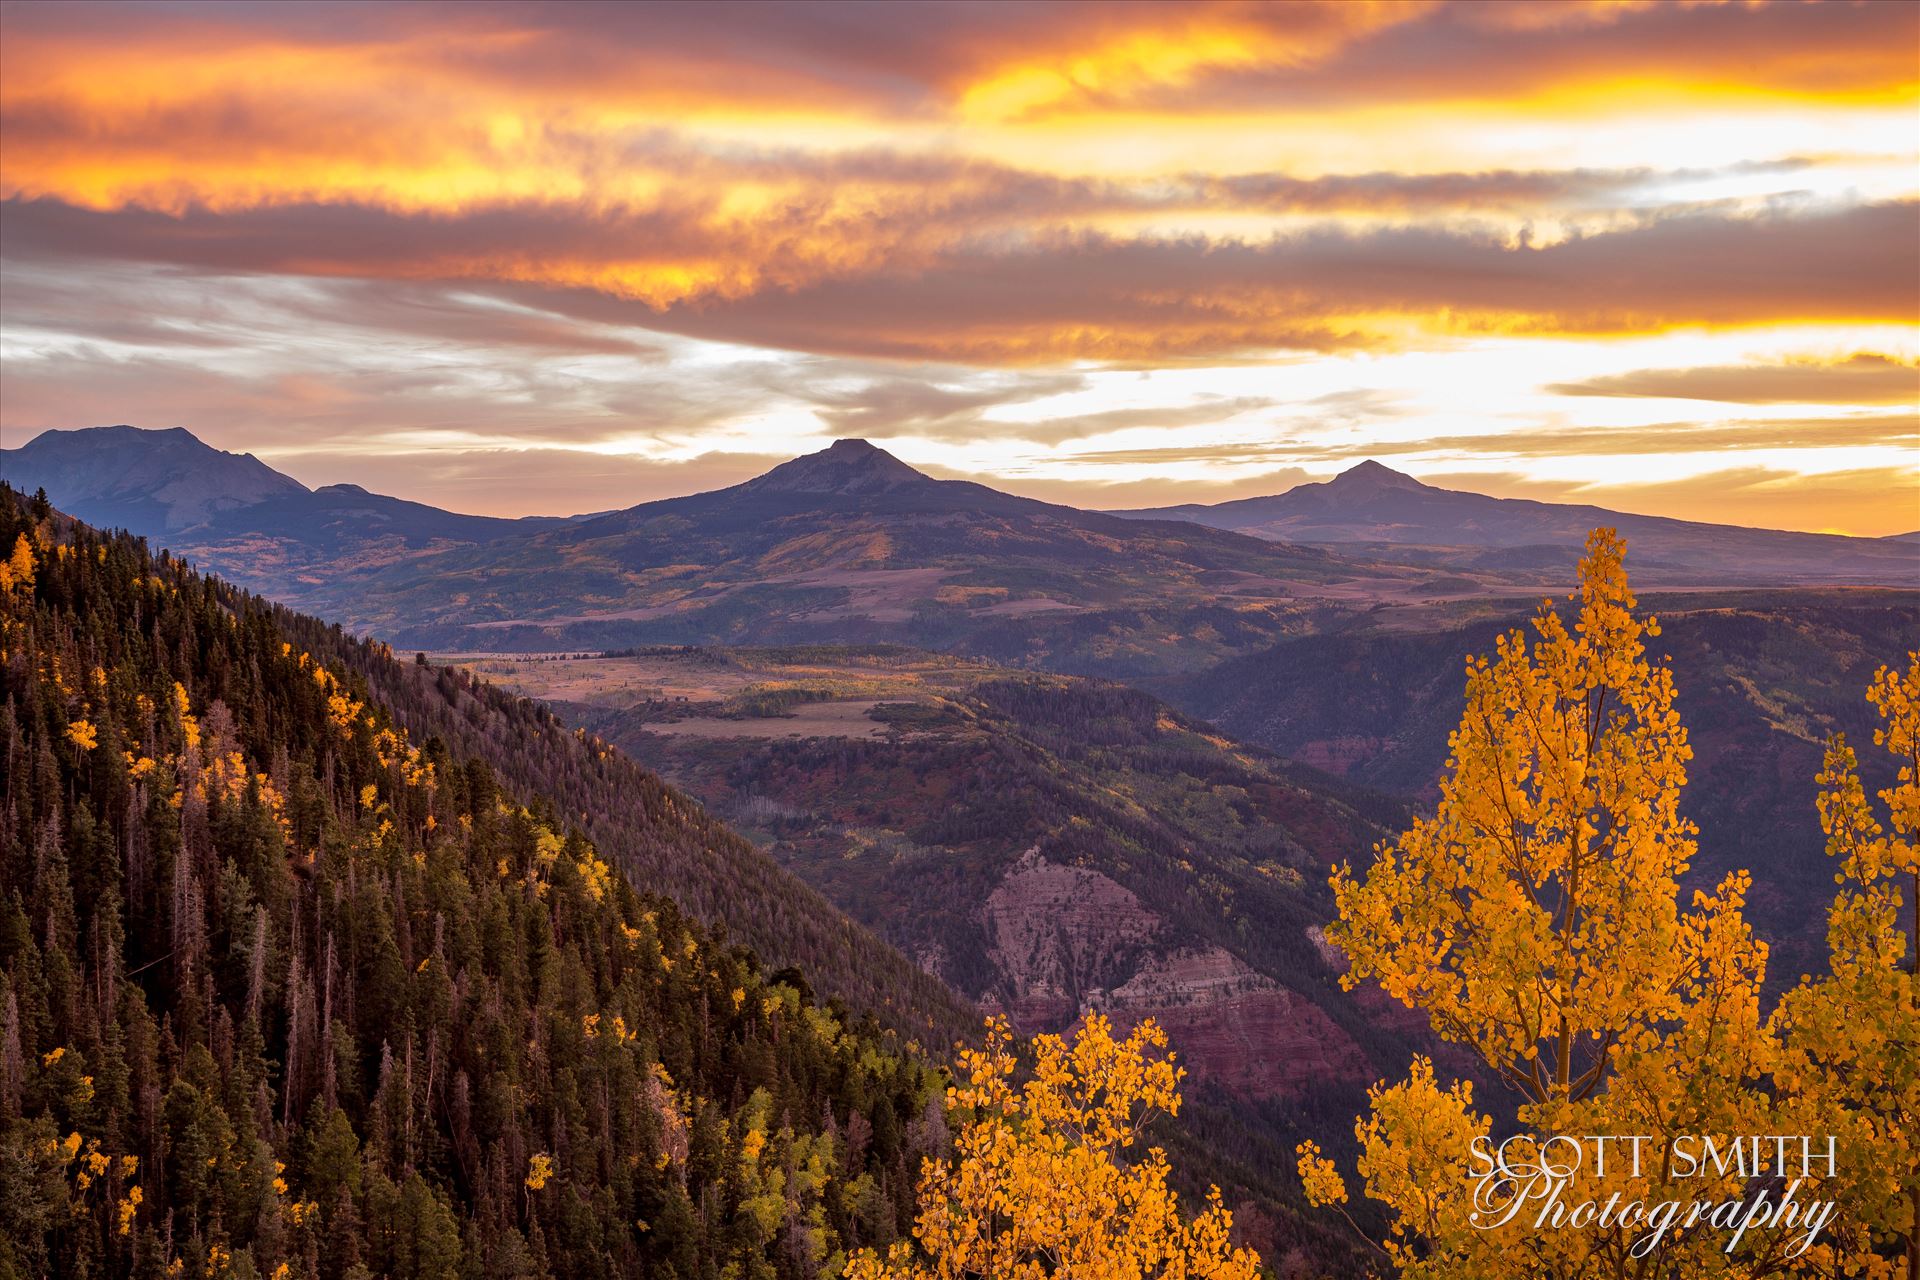 Last Dollar Road Sunset - Sunset on a quiet, secluded spot from Last Dollar Road, outside of Telluride, Colorado in the fall. by Scott Smith Photos